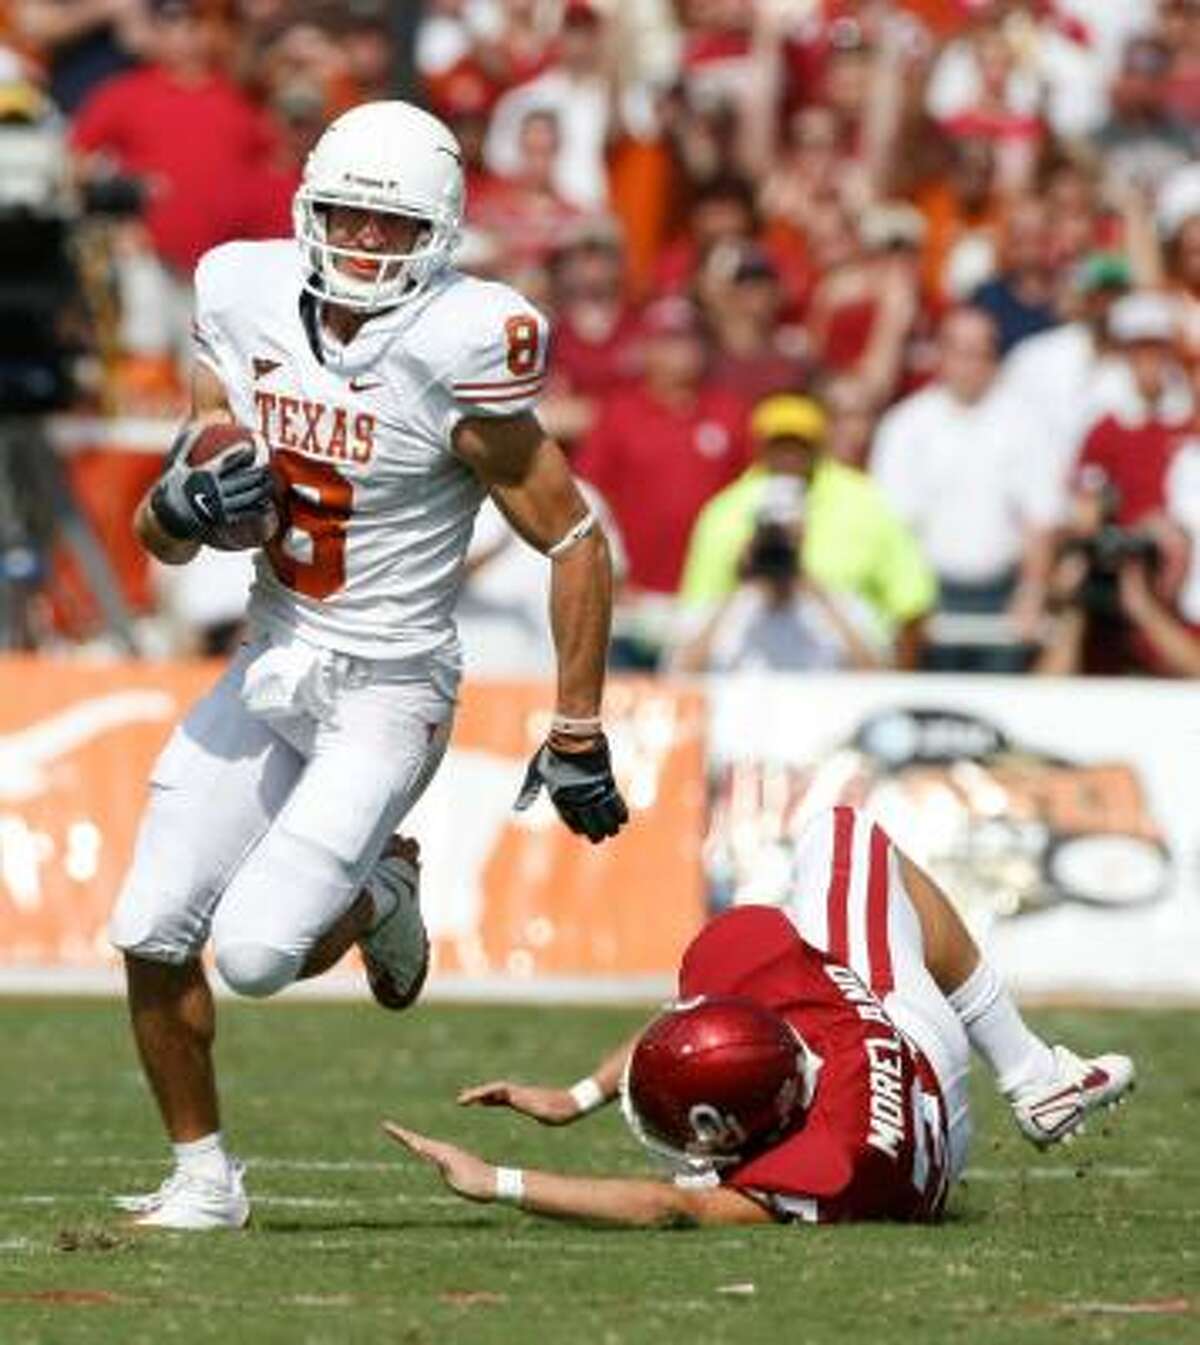 In addition to Colt McCoy, the Texas offense lost Jordan Shipley (above) and three offensive linemen.